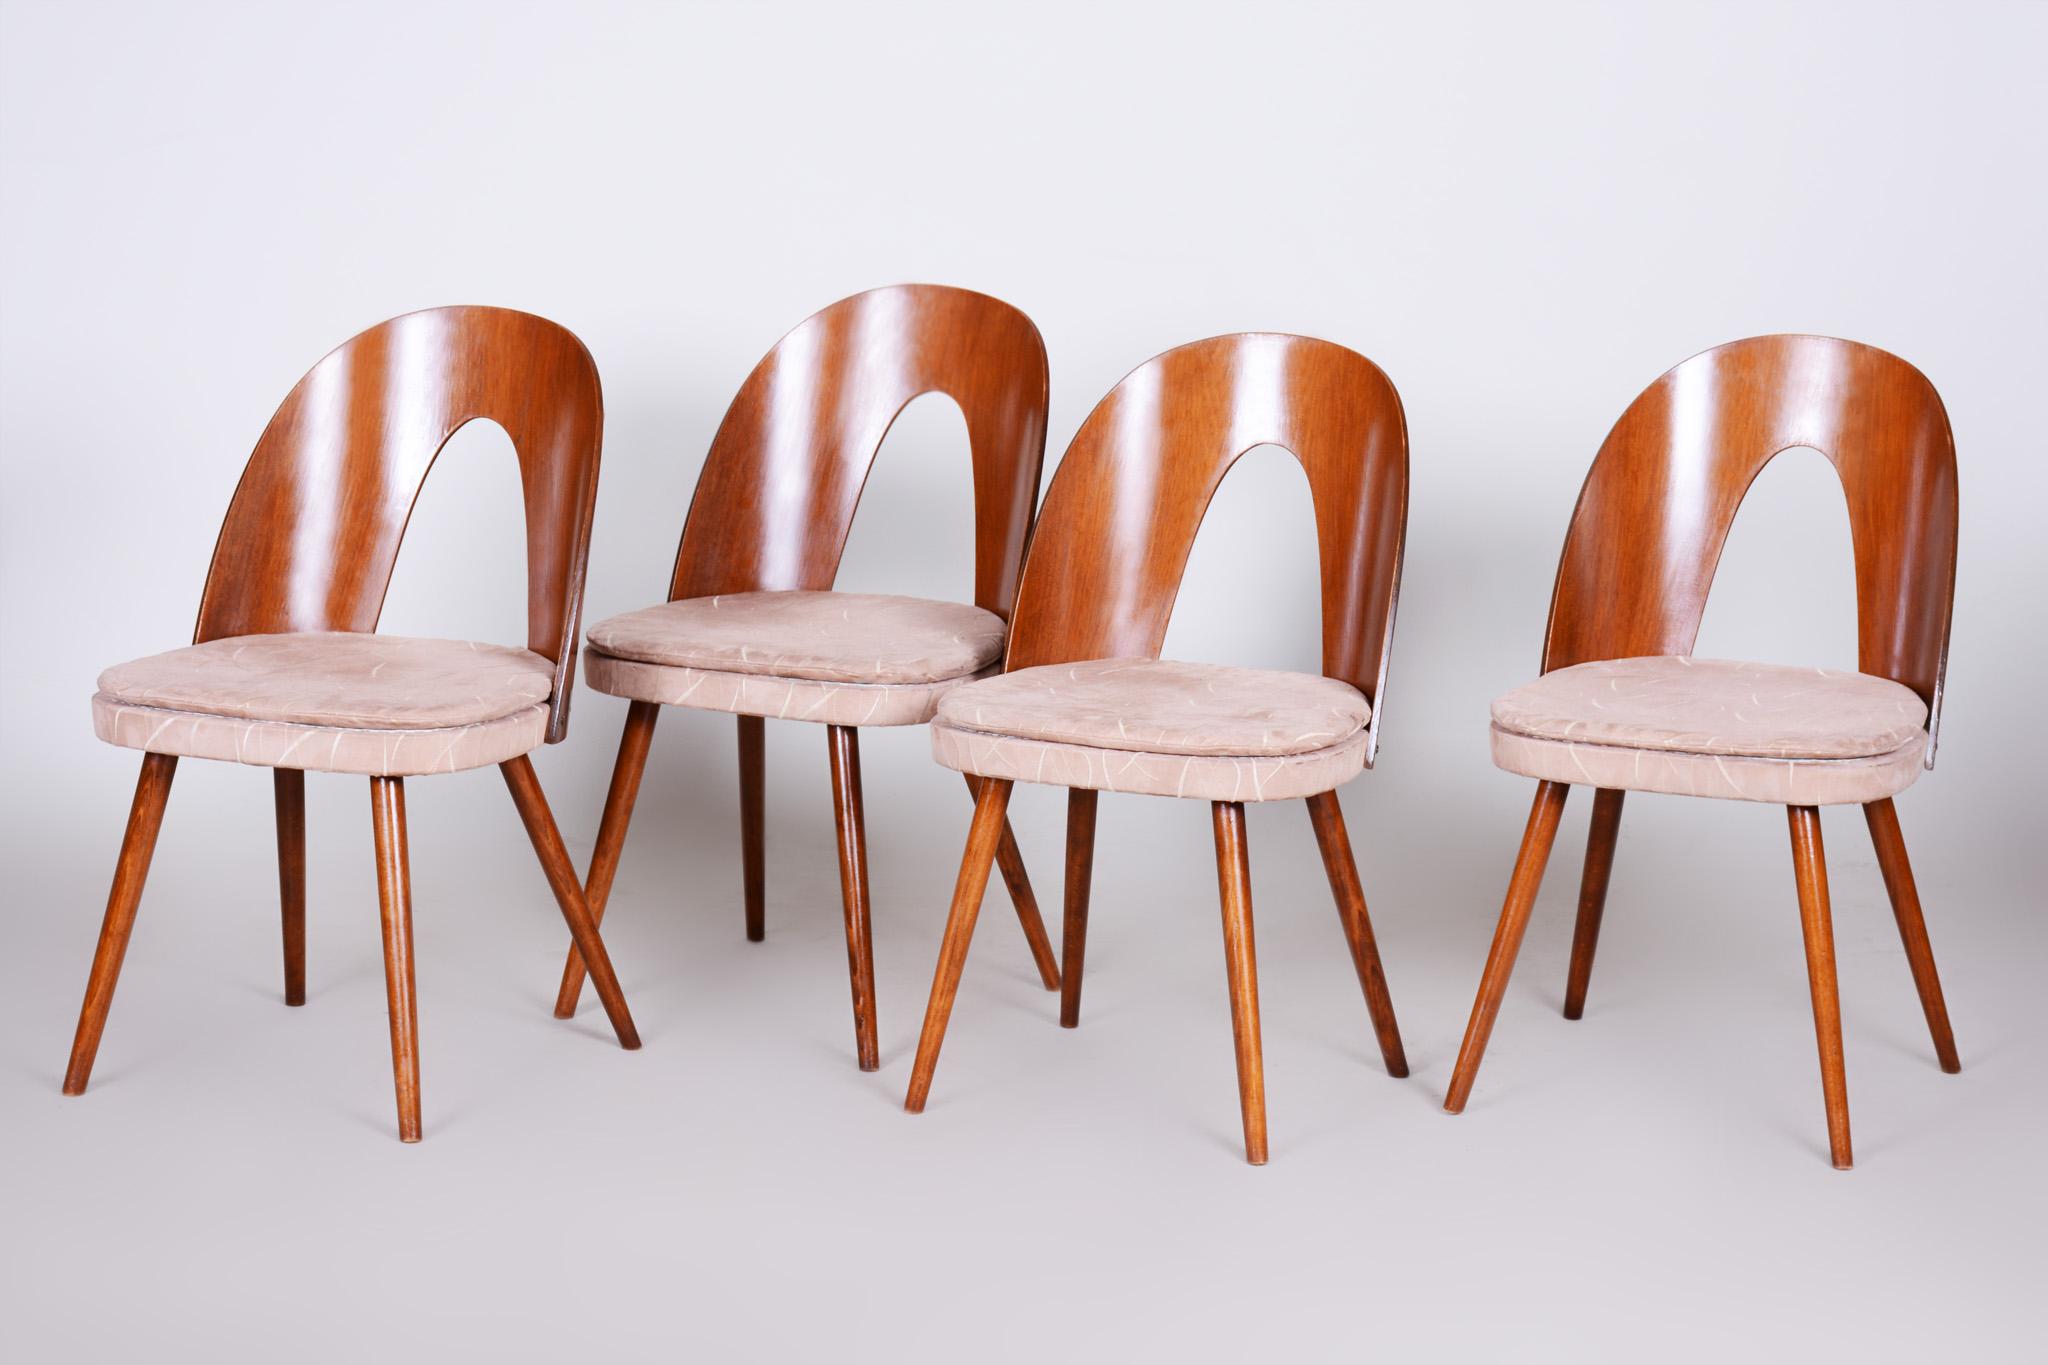 Czech midcentury chairs, 4 pieces.
Material: Walnut
Period: 1950-1959
Original preserved condition
Made by architect Antonín Šuman.